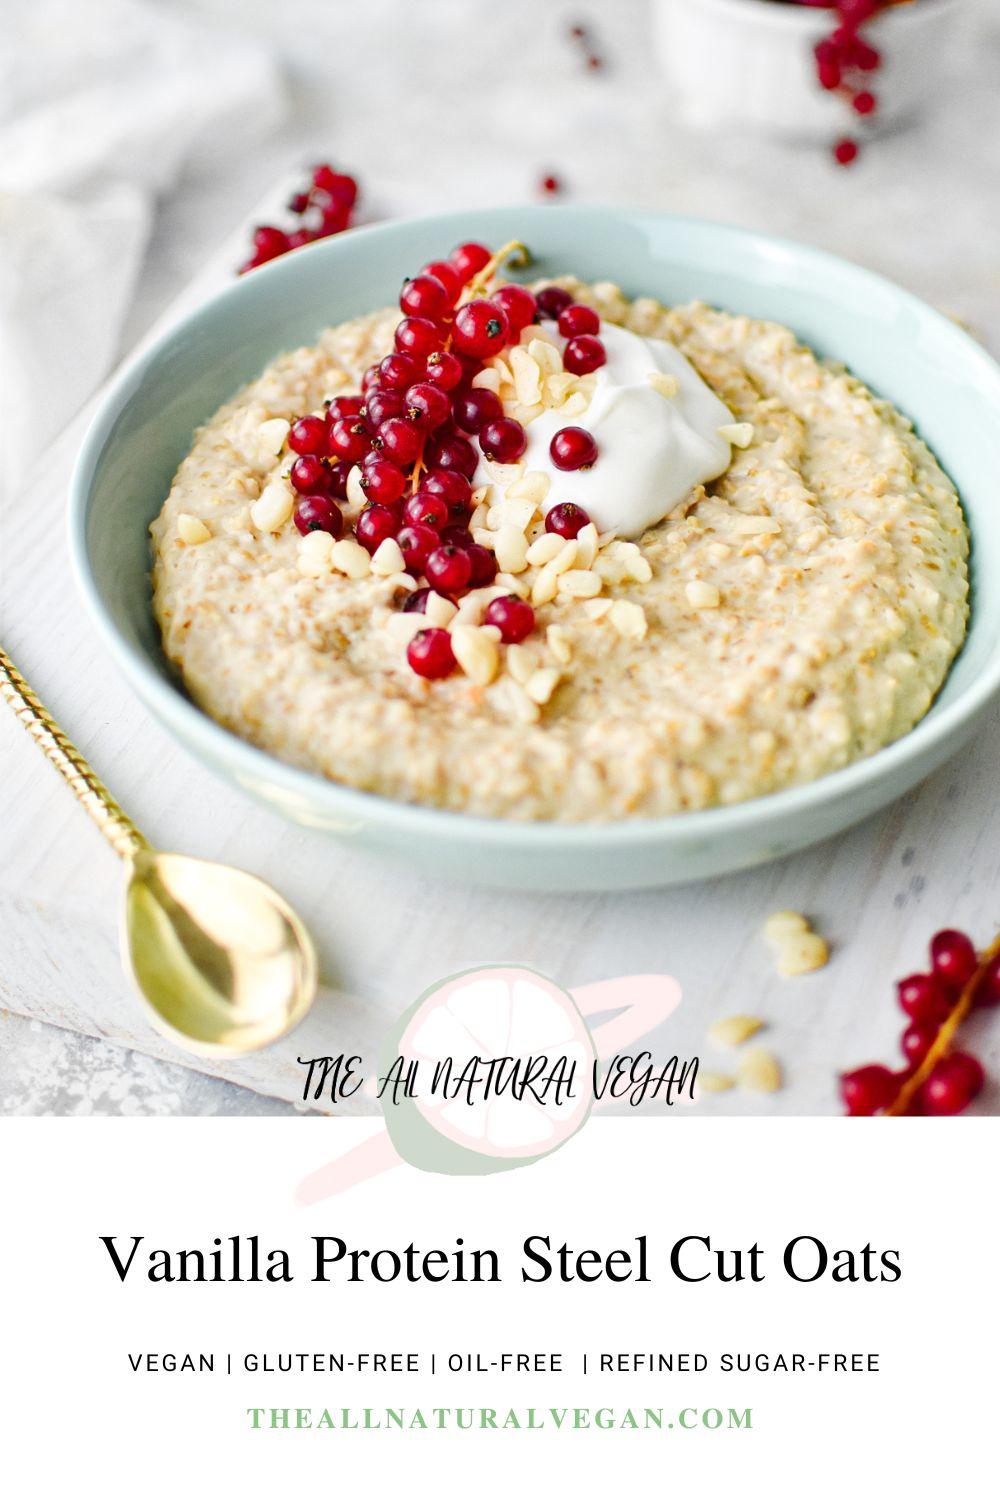 the vanilla steel cut oats recipe card stating this recipe is vegan, gluten-free, oil-free, and refined sugar-free